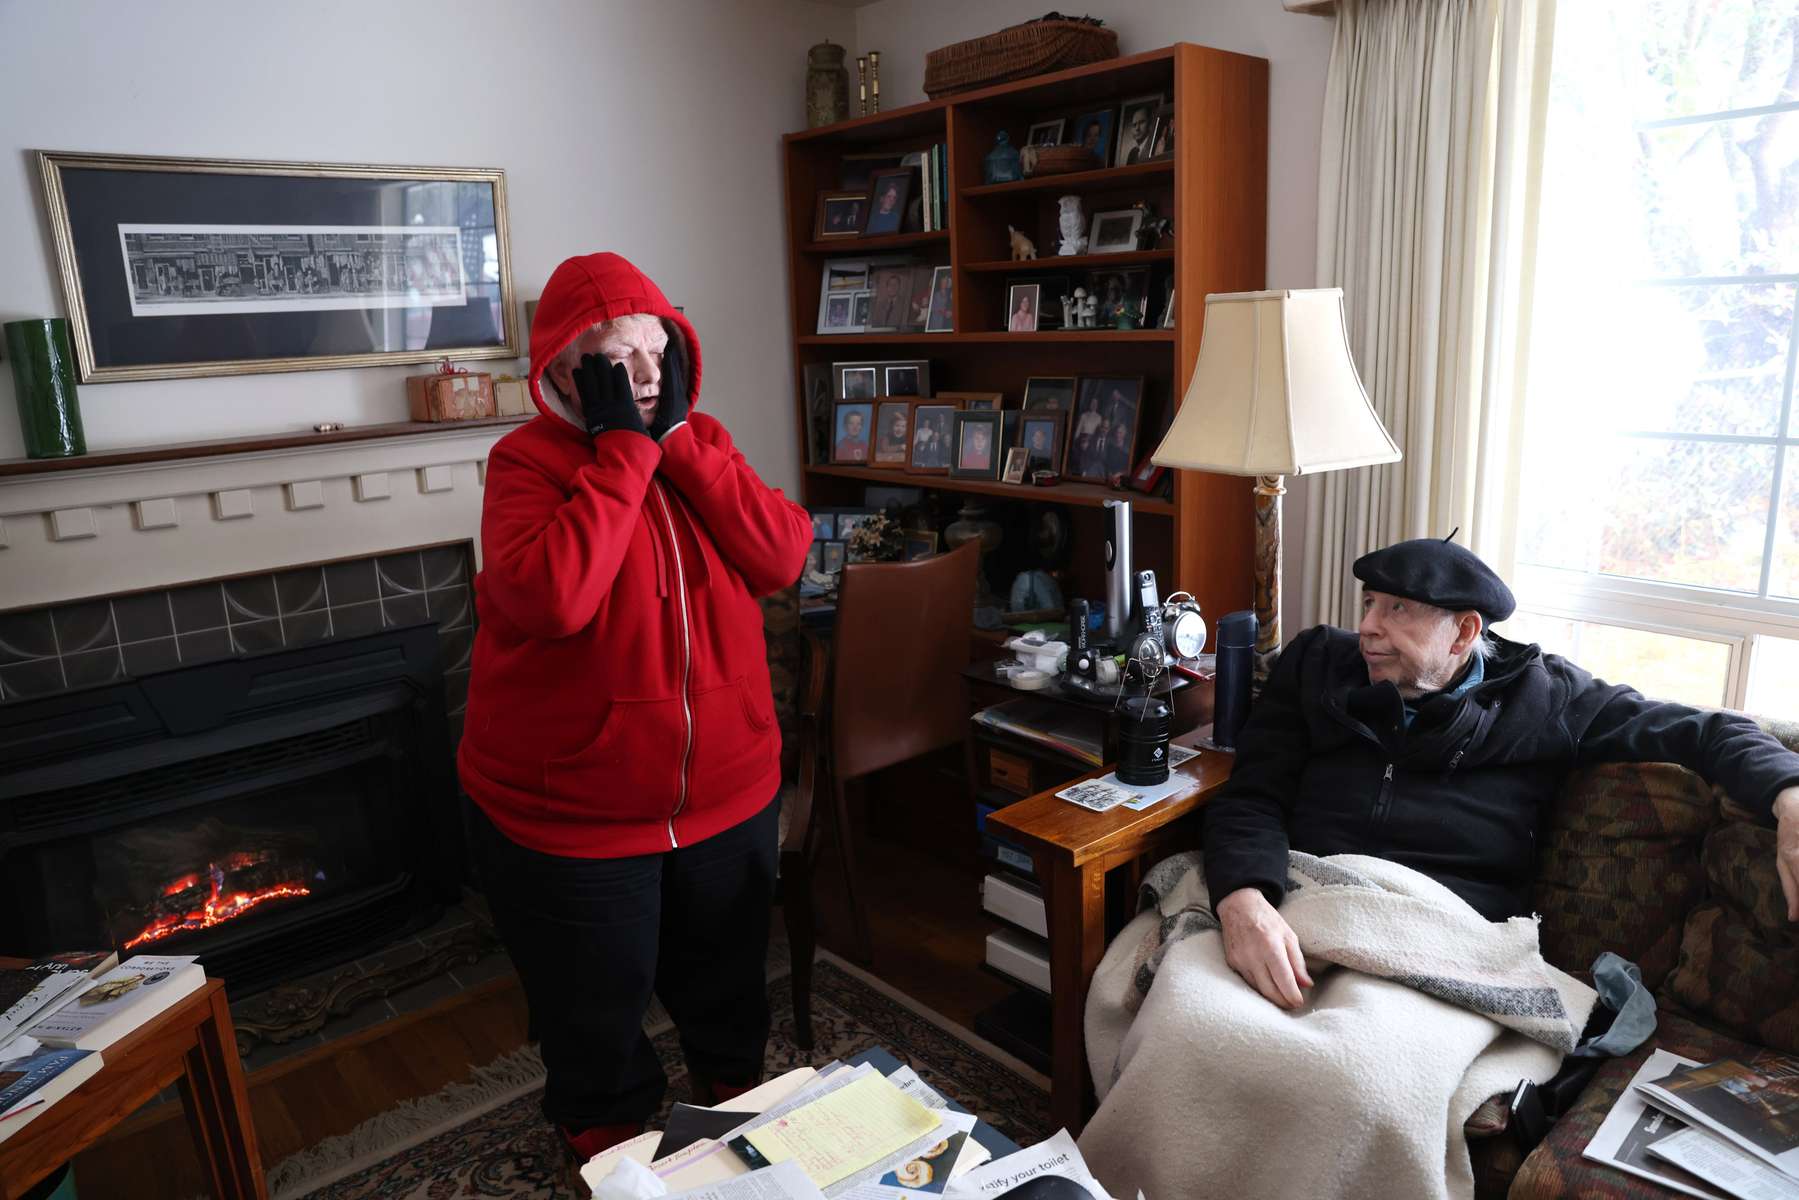 Nancy and Jim McMurrer try and stay warm by sitting by their gas fireplace under blankets in their home in Lake Forest Park on November 30, 2022. Their power, run by Seattle City Light, went out last night sometime before 10pm. “I kept waking up wondering what time it was,” said Nancy. They have several flashlights and lit candles throughout their house last night. Jim is thankful they at least have gas to run the fireplace -though the fan doesn’t run without electricity- and is concerned that so many cities are changing their building codes to not allow gas in new construction. The couple has hot water at least. Nancy says she is going to take a hot shower so she can feel “toasty and warm.”